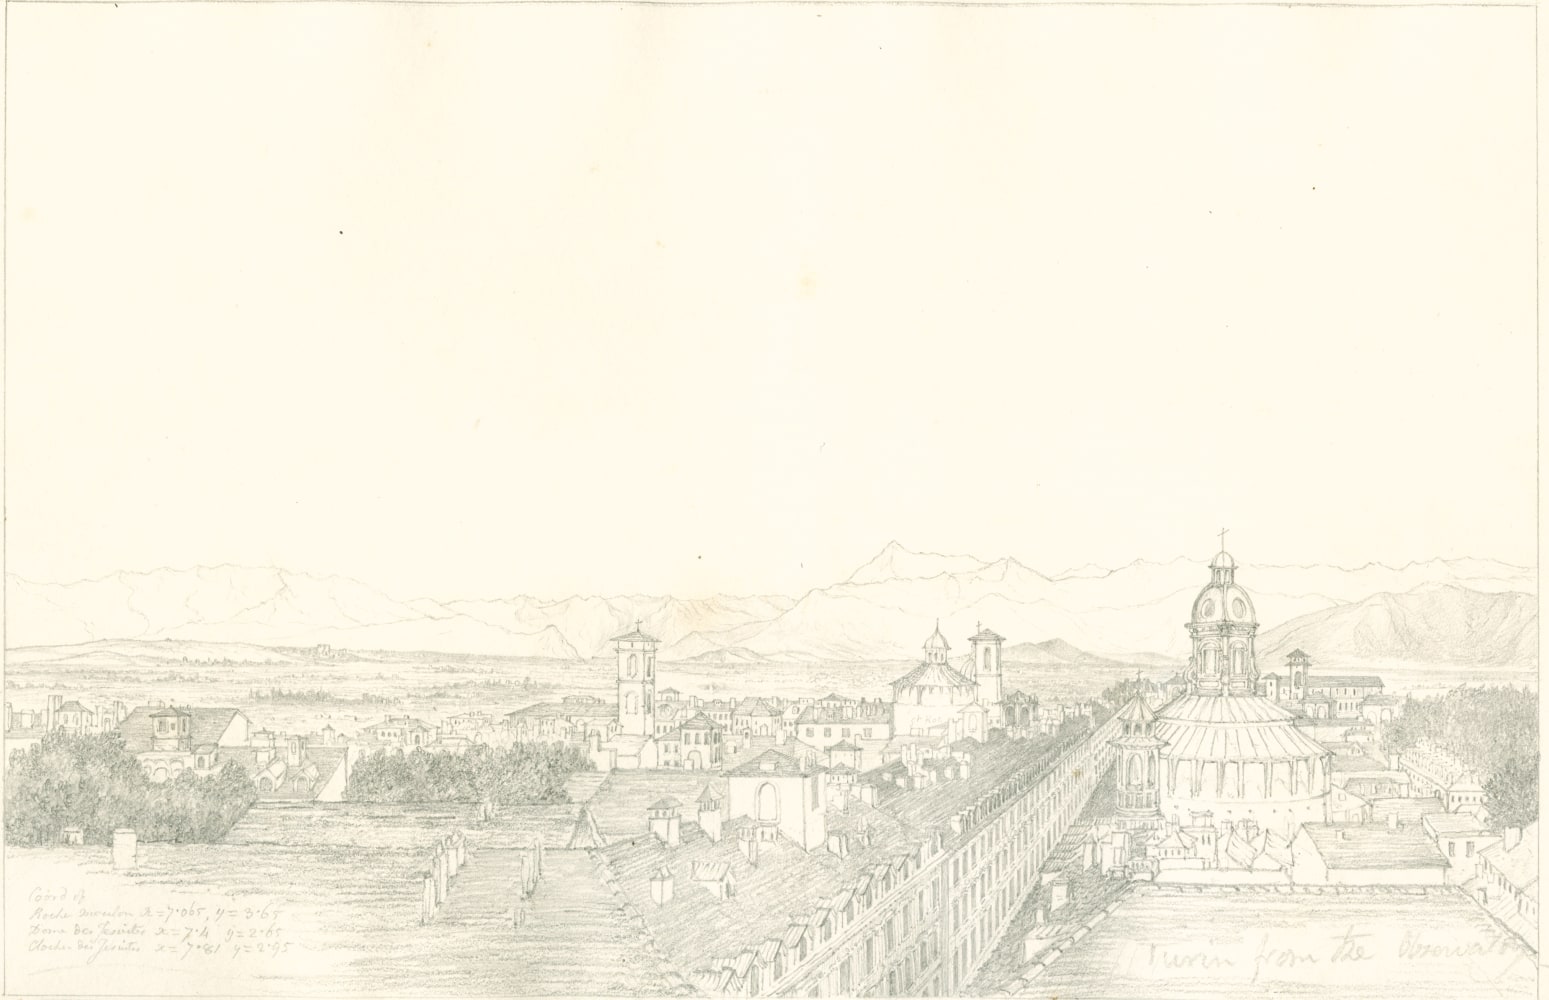 Sir John Frederick William HERSCHEL (English, 1792-1872) &quot;No 351 Turin with the chain of the Alps. From the roof of the Observatory”, 1824 Camera lucida drawing, pencil on paper